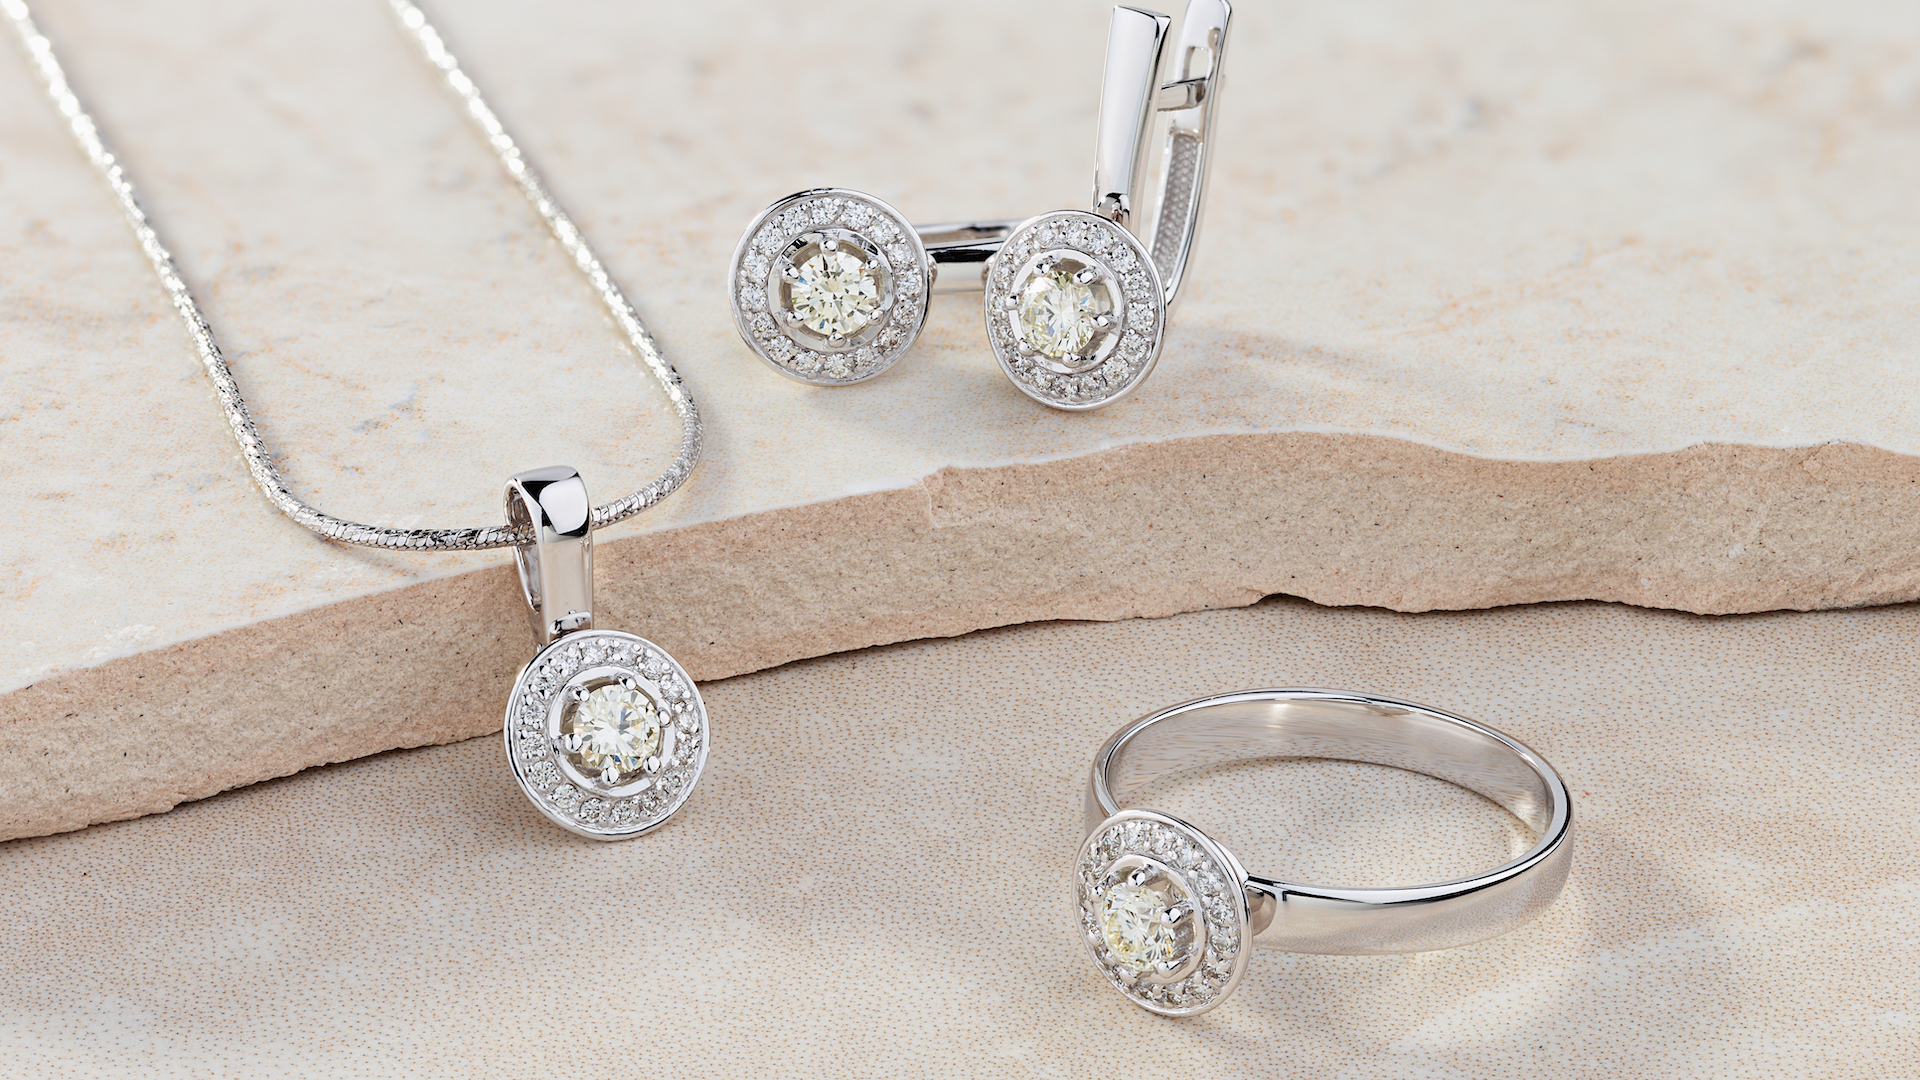 Elegant jewelry set of white gold ring, necklace and earrings with diamonds